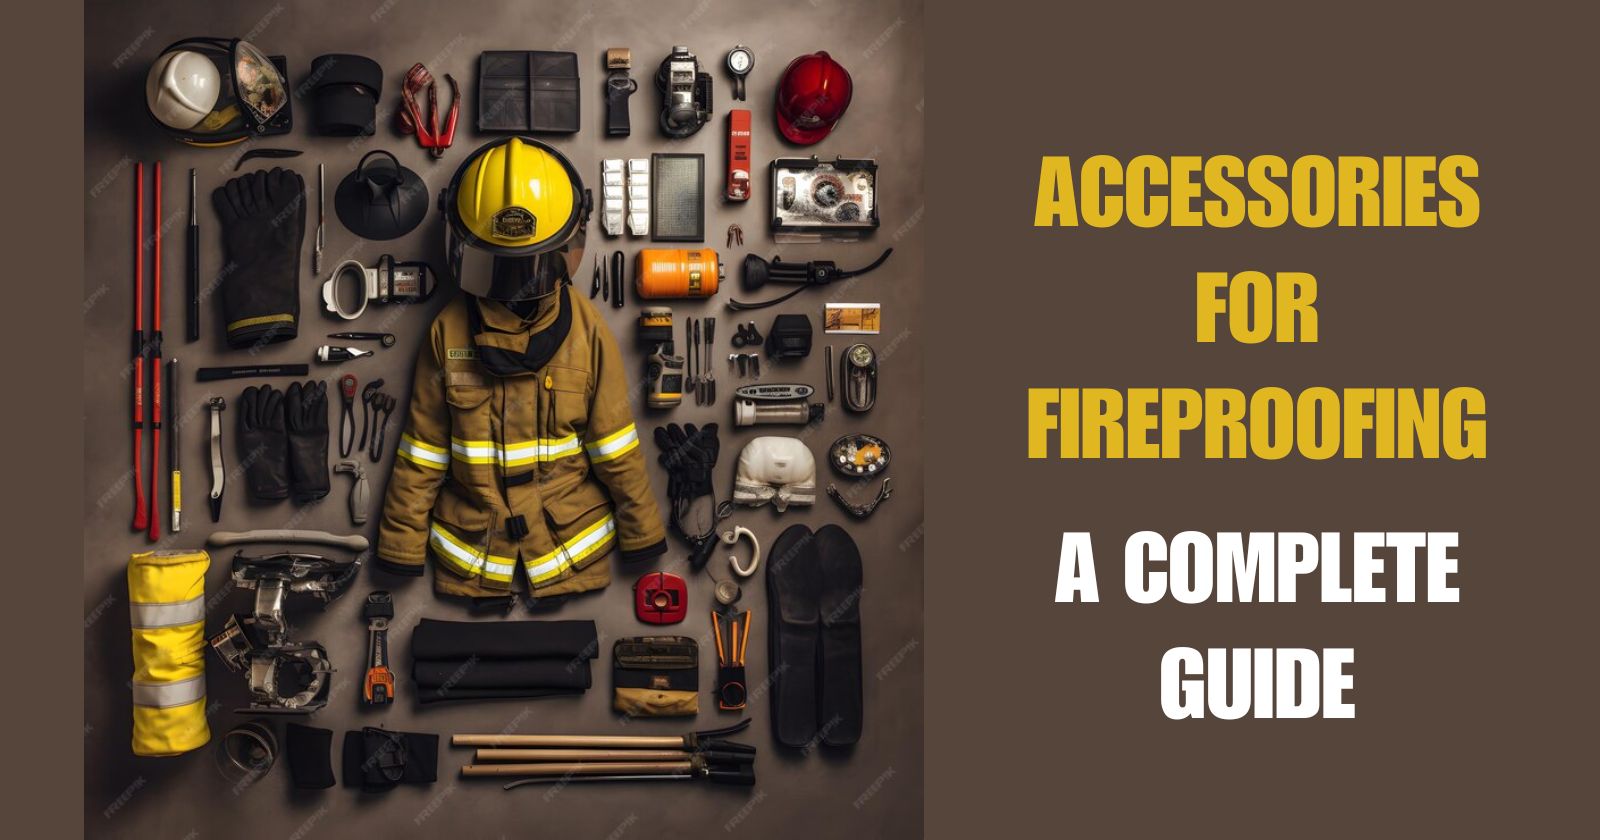 A Complete Guide About Fireproofing Accessories